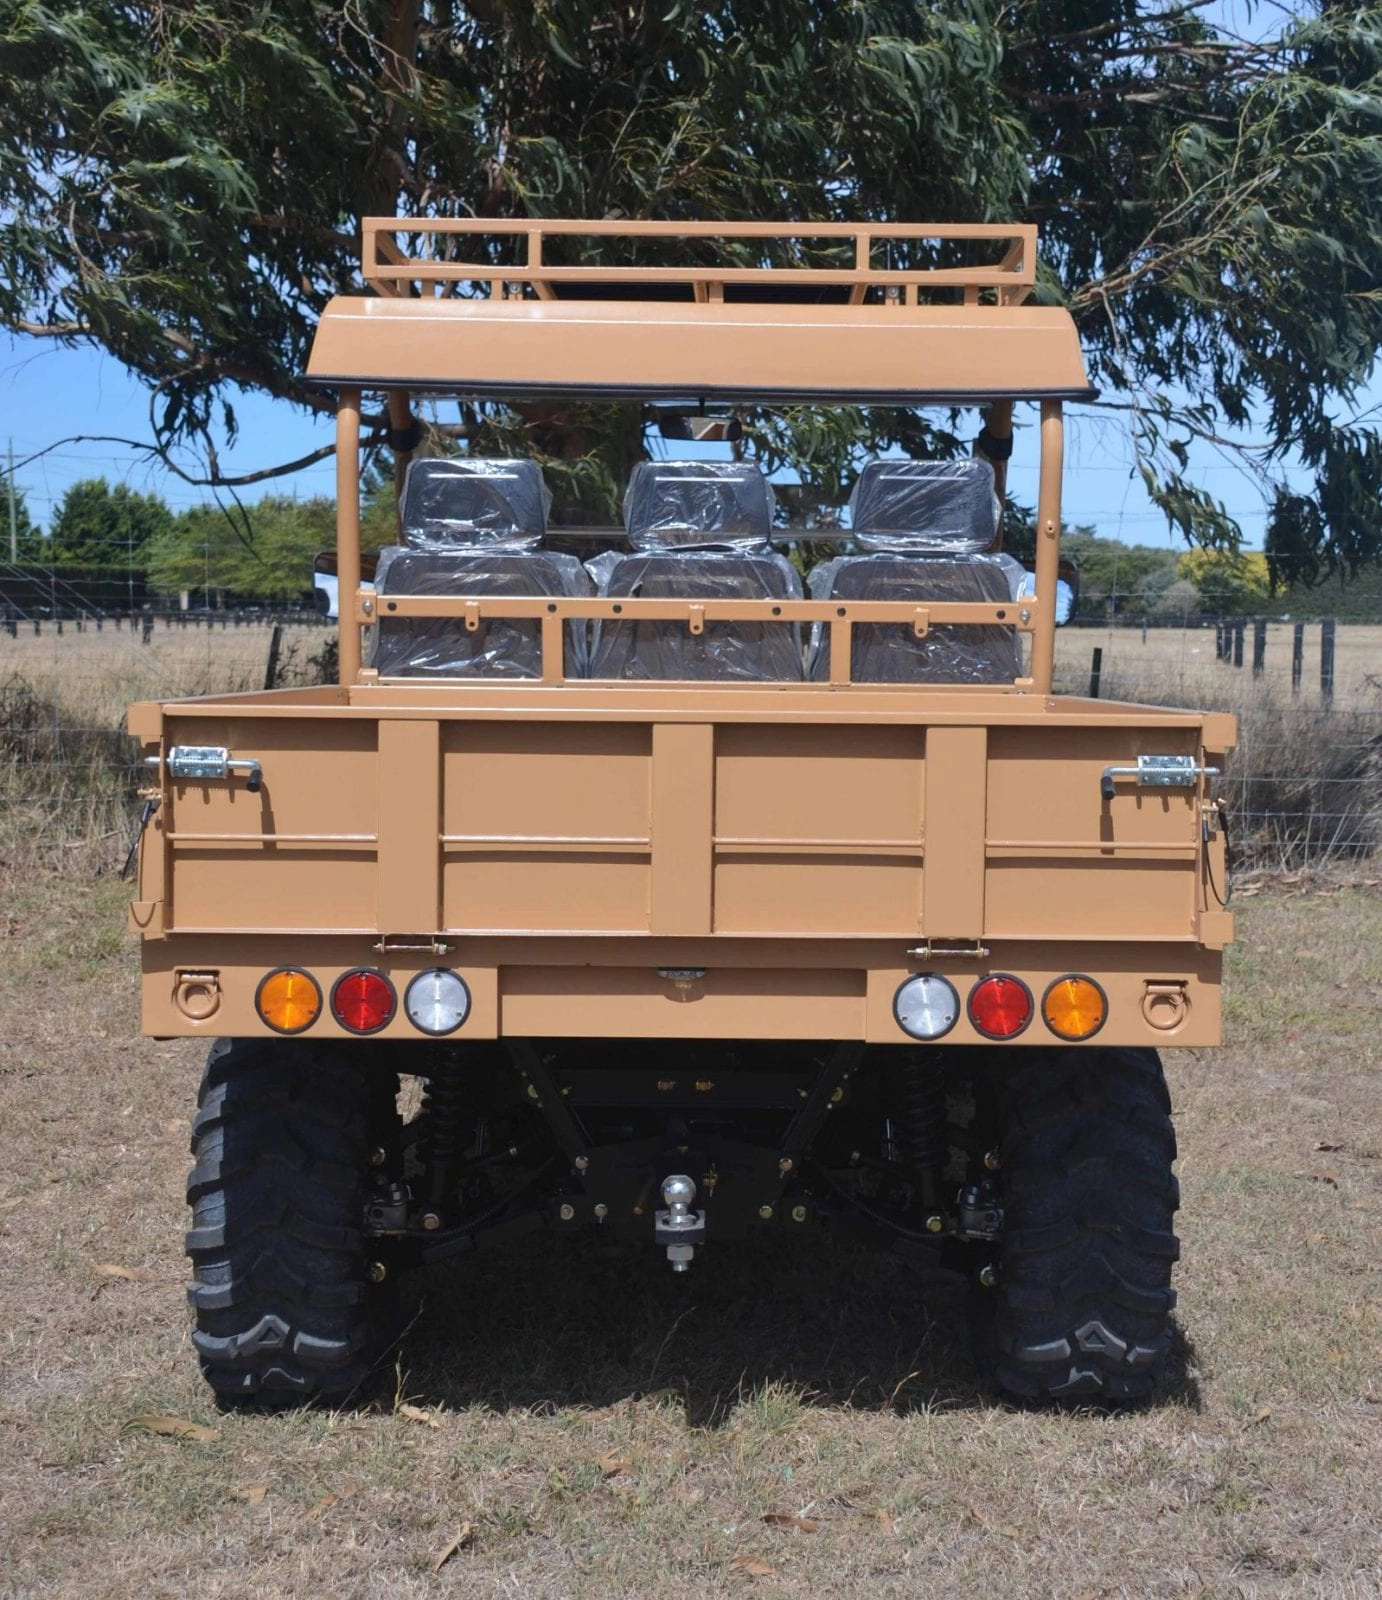 A military vehicle with seats on the back.